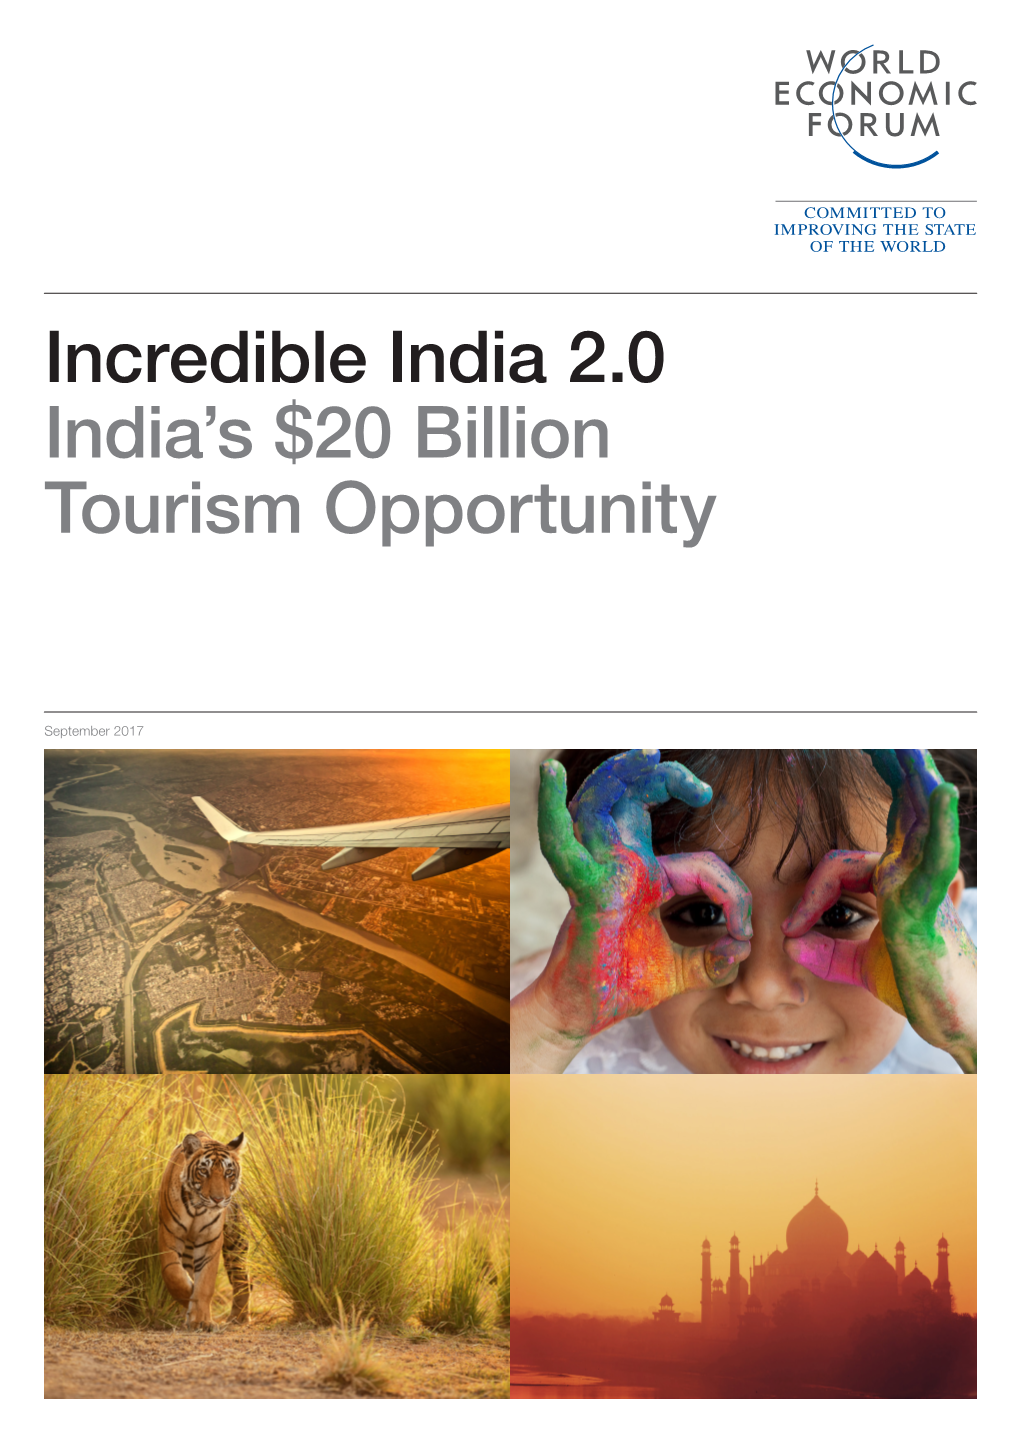 Incredible India 2.0 India's $20 Billion Tourism Opportunity